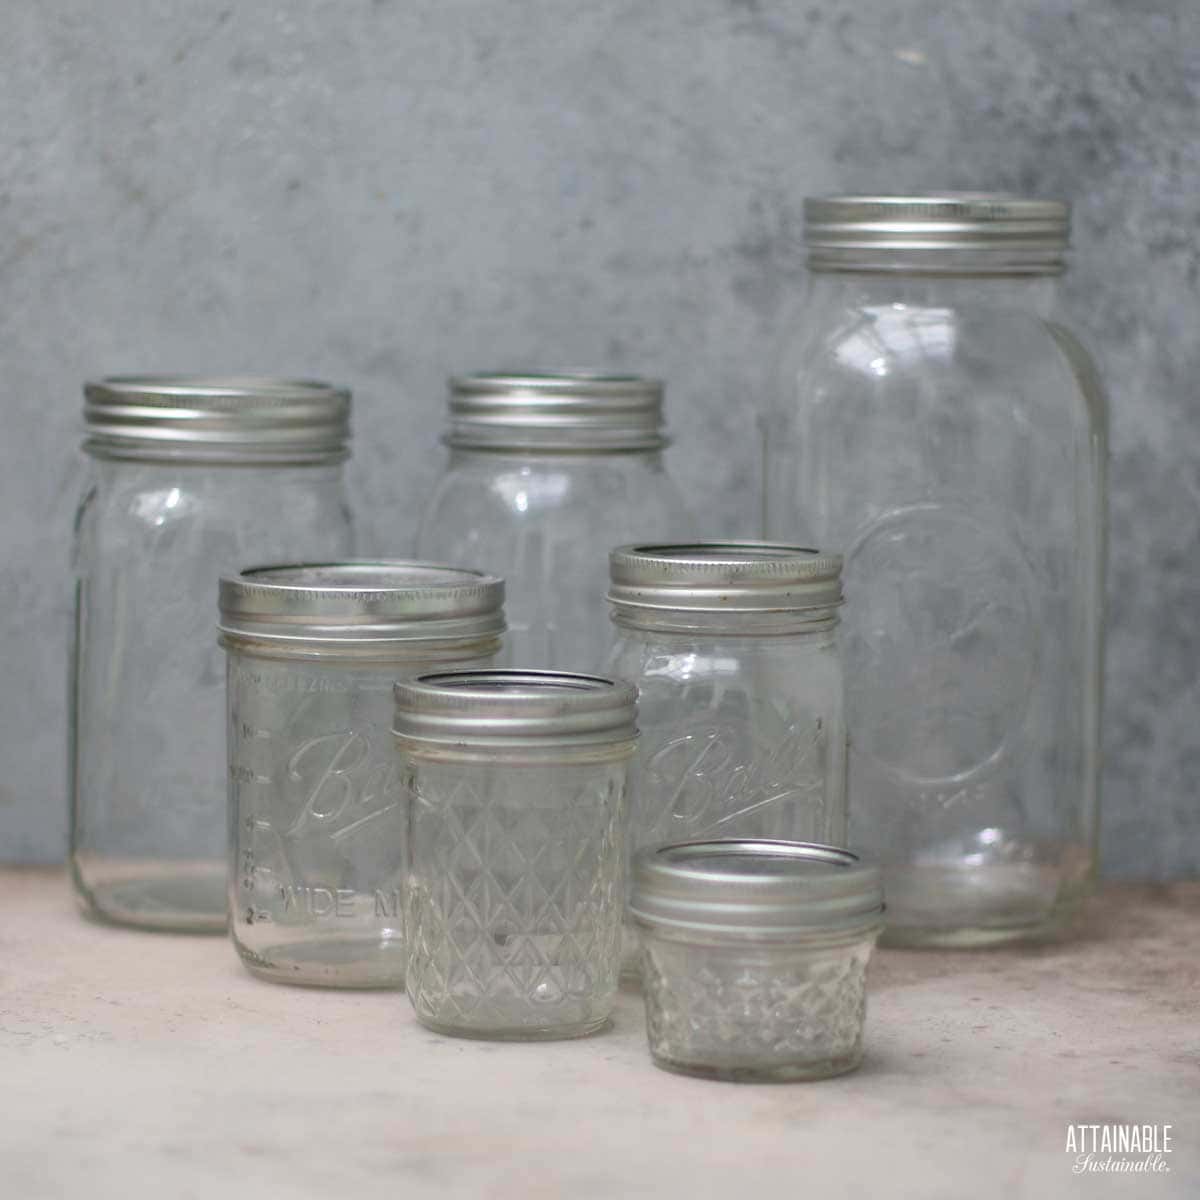 daily-survival-guide-to-mason-canning-jars-sizes-and-uses